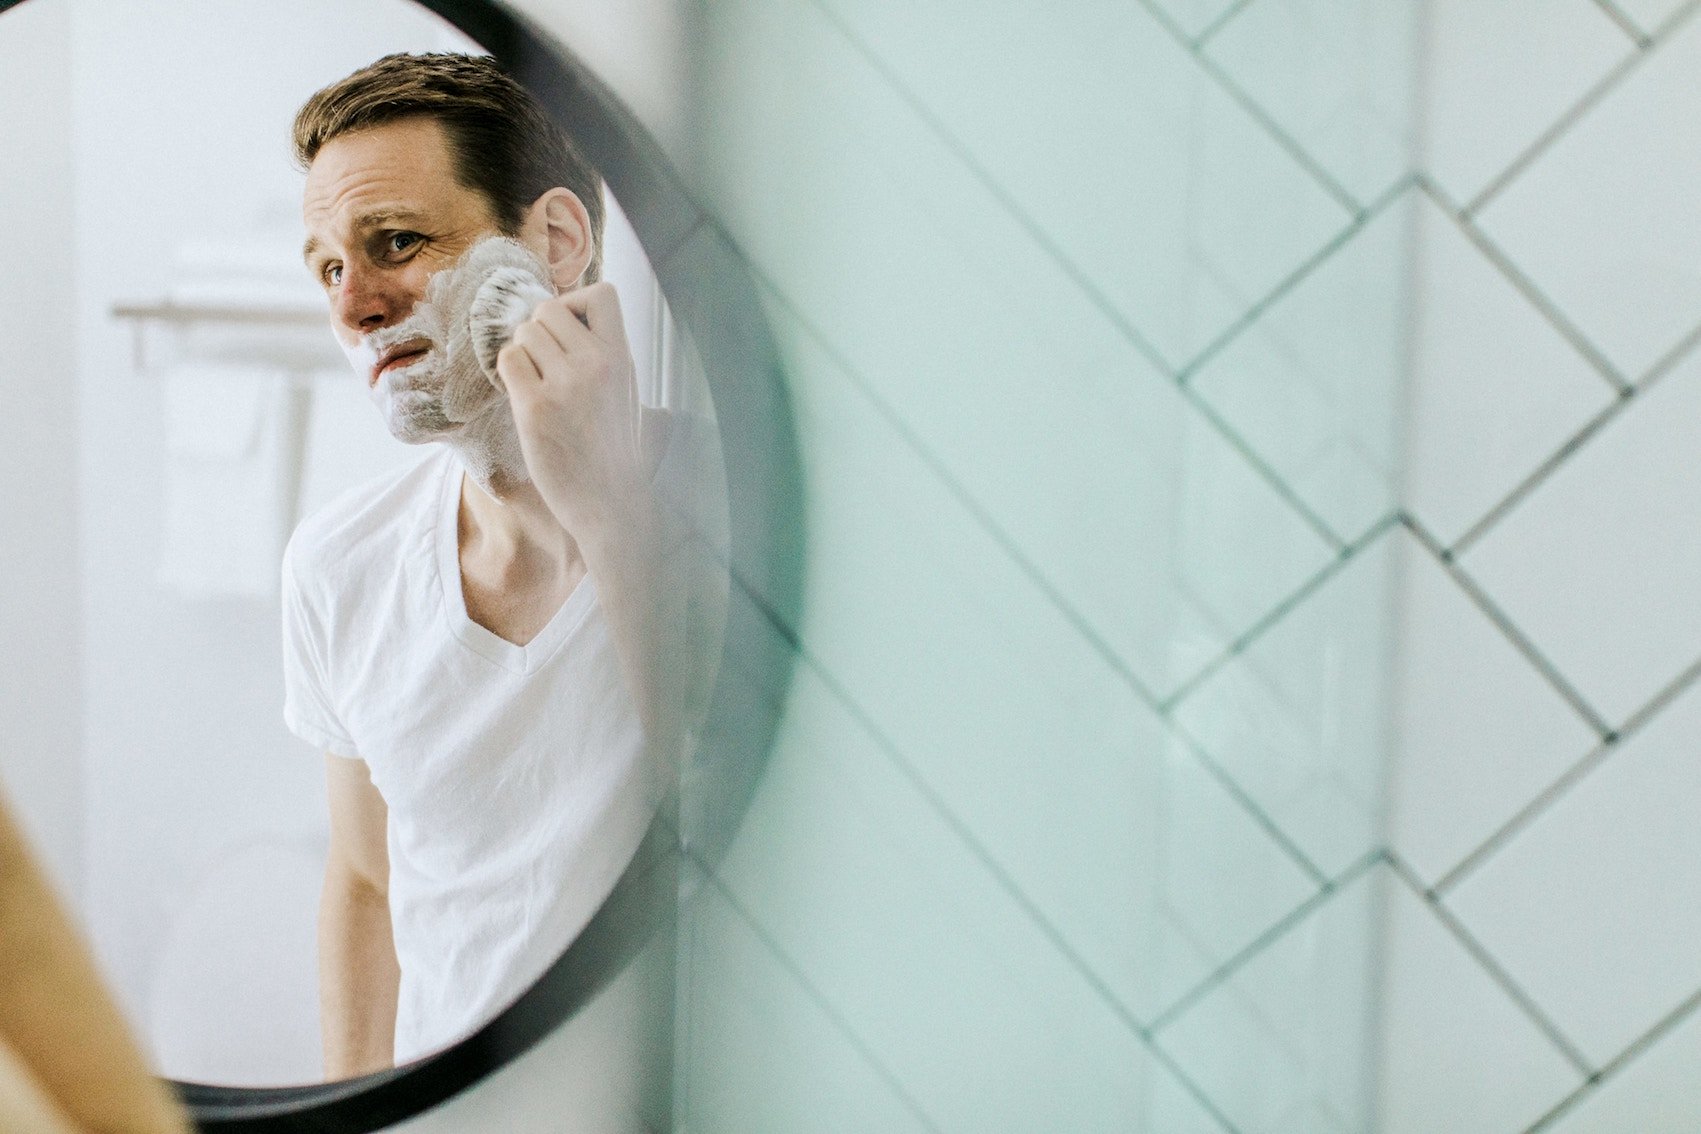 Grooming mistakes every man needs to avoid